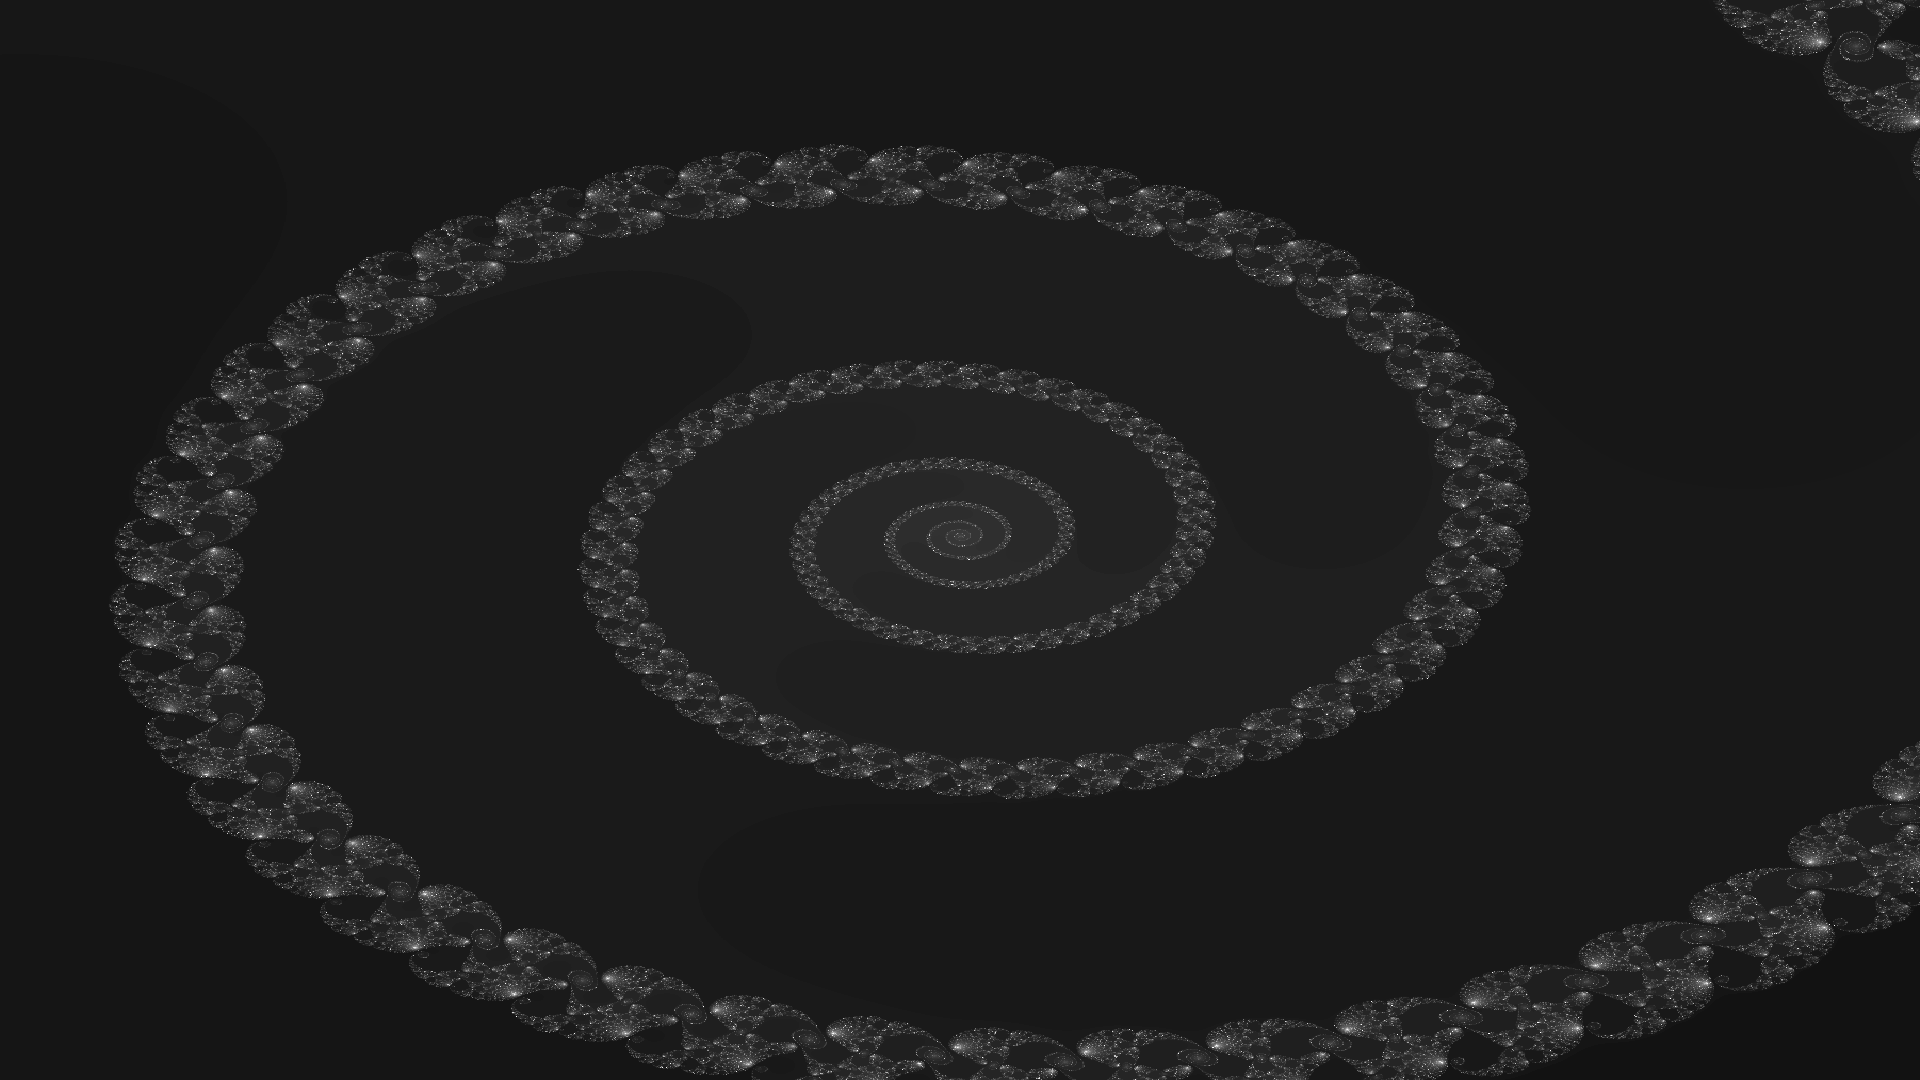 A zoomed in version of the Mandelbrot set